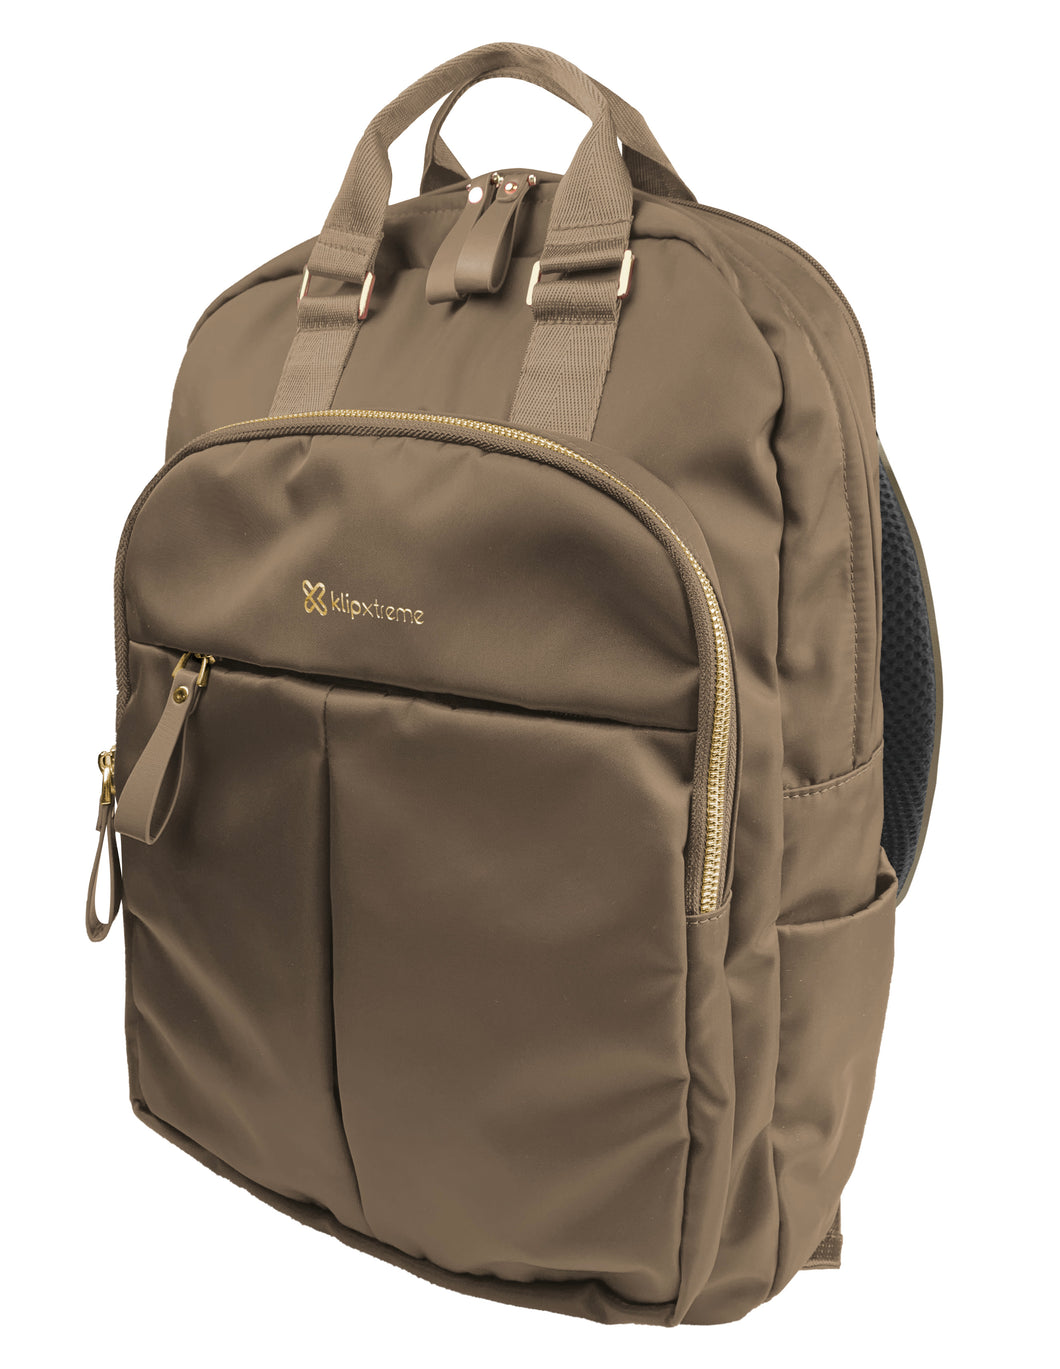 KLIPX NOTEBOOK CARRYING BACKPACK 15.6